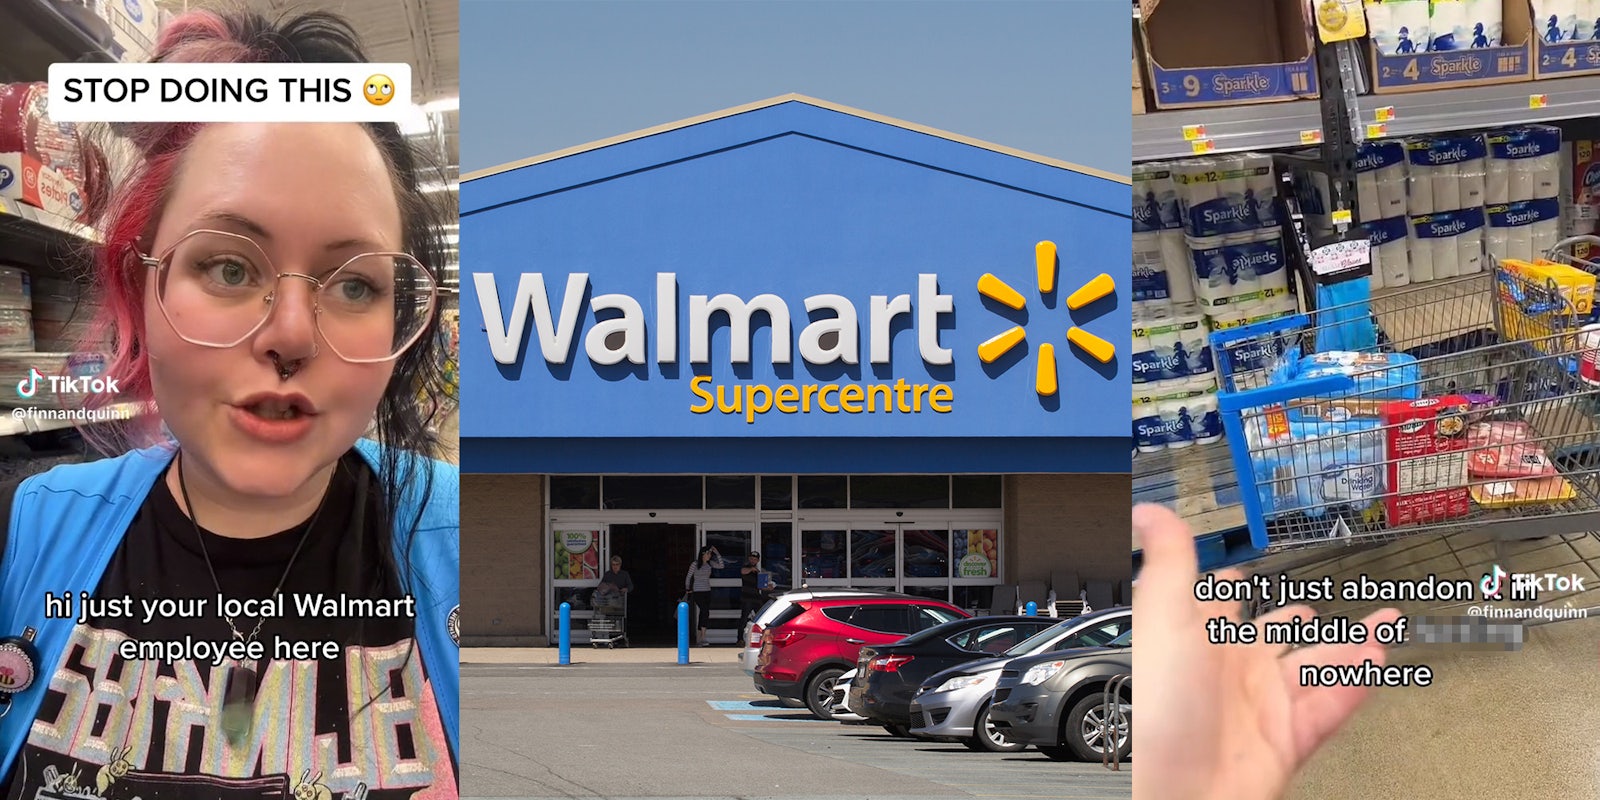 Walmart worker calls out customers for abandoning cart